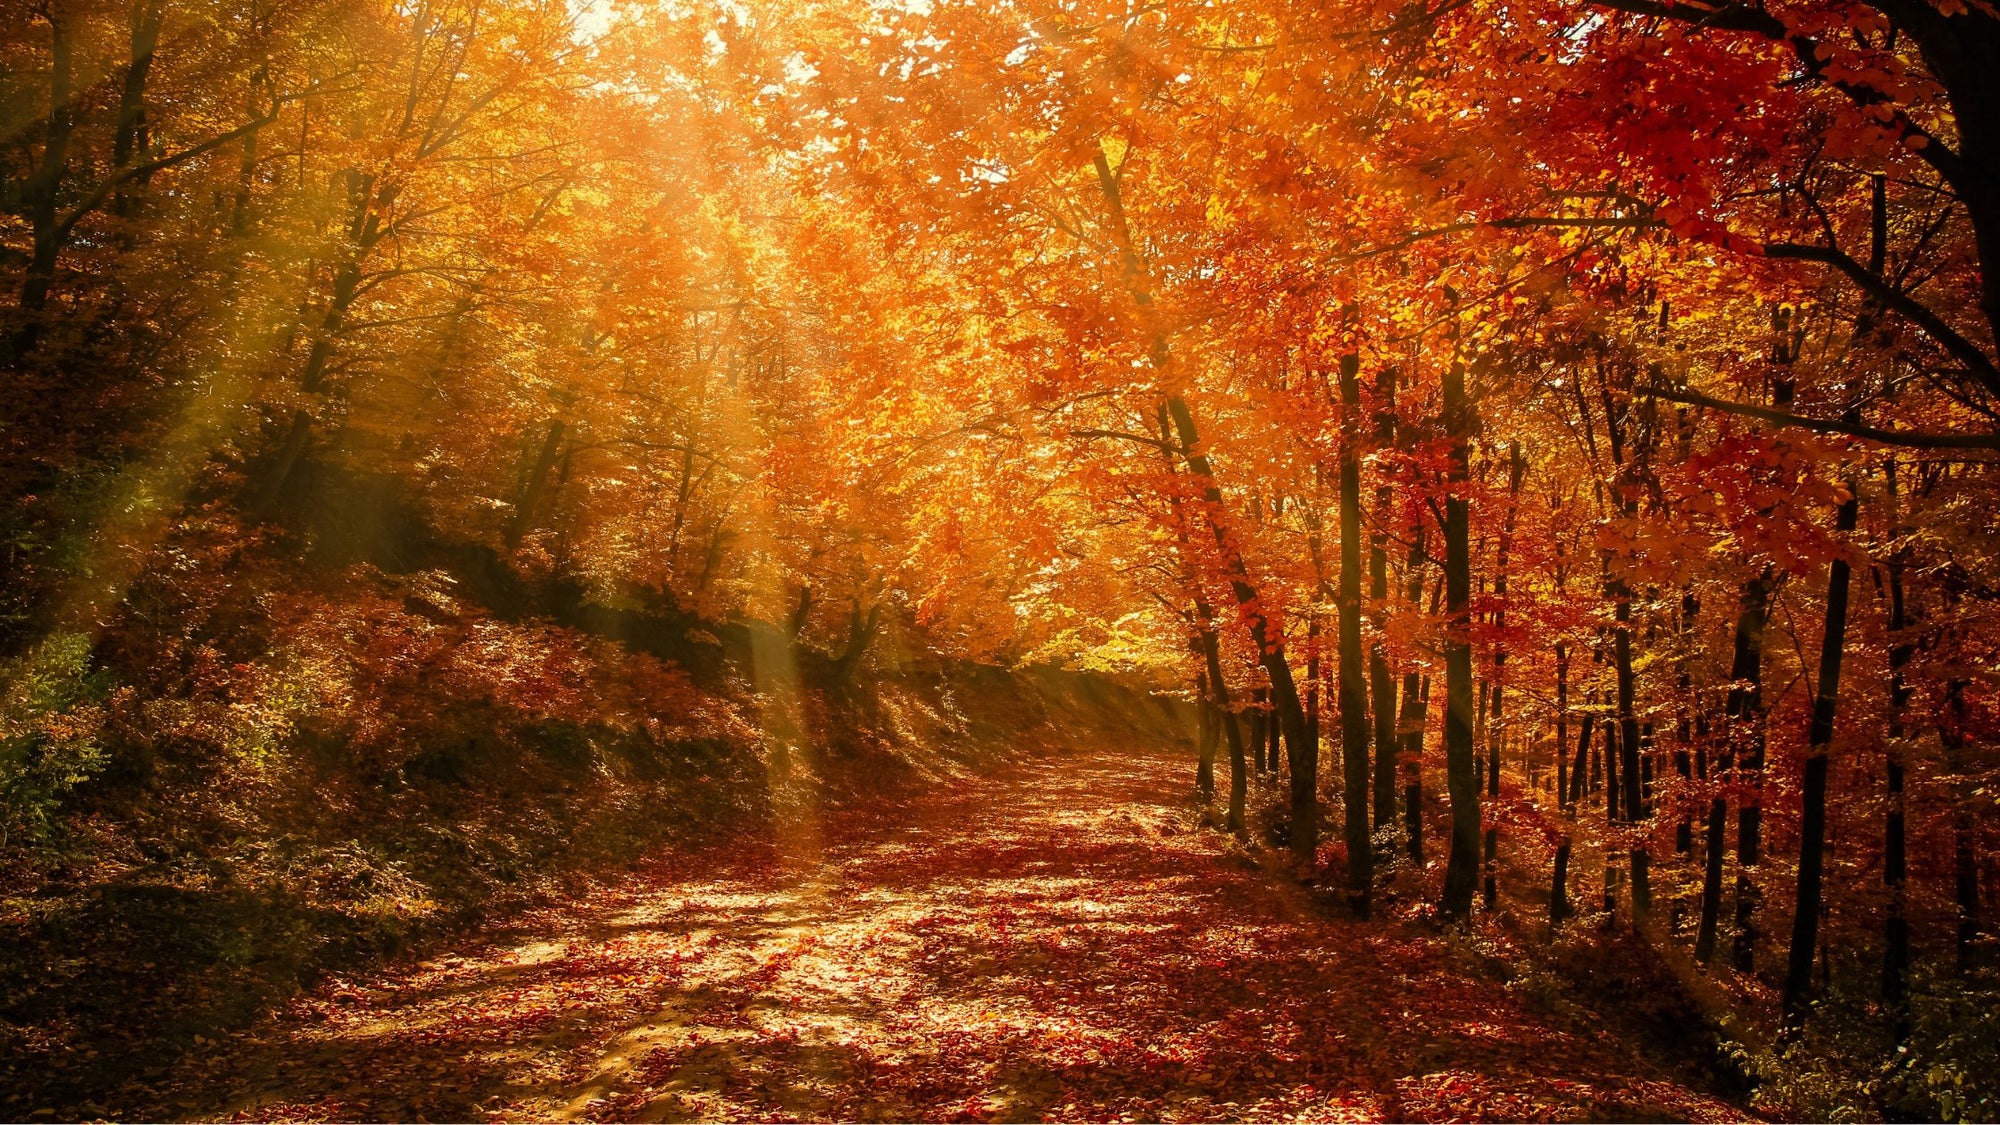 Safety Tips For Hiking In the Fall: Embrace the Beauty Safely